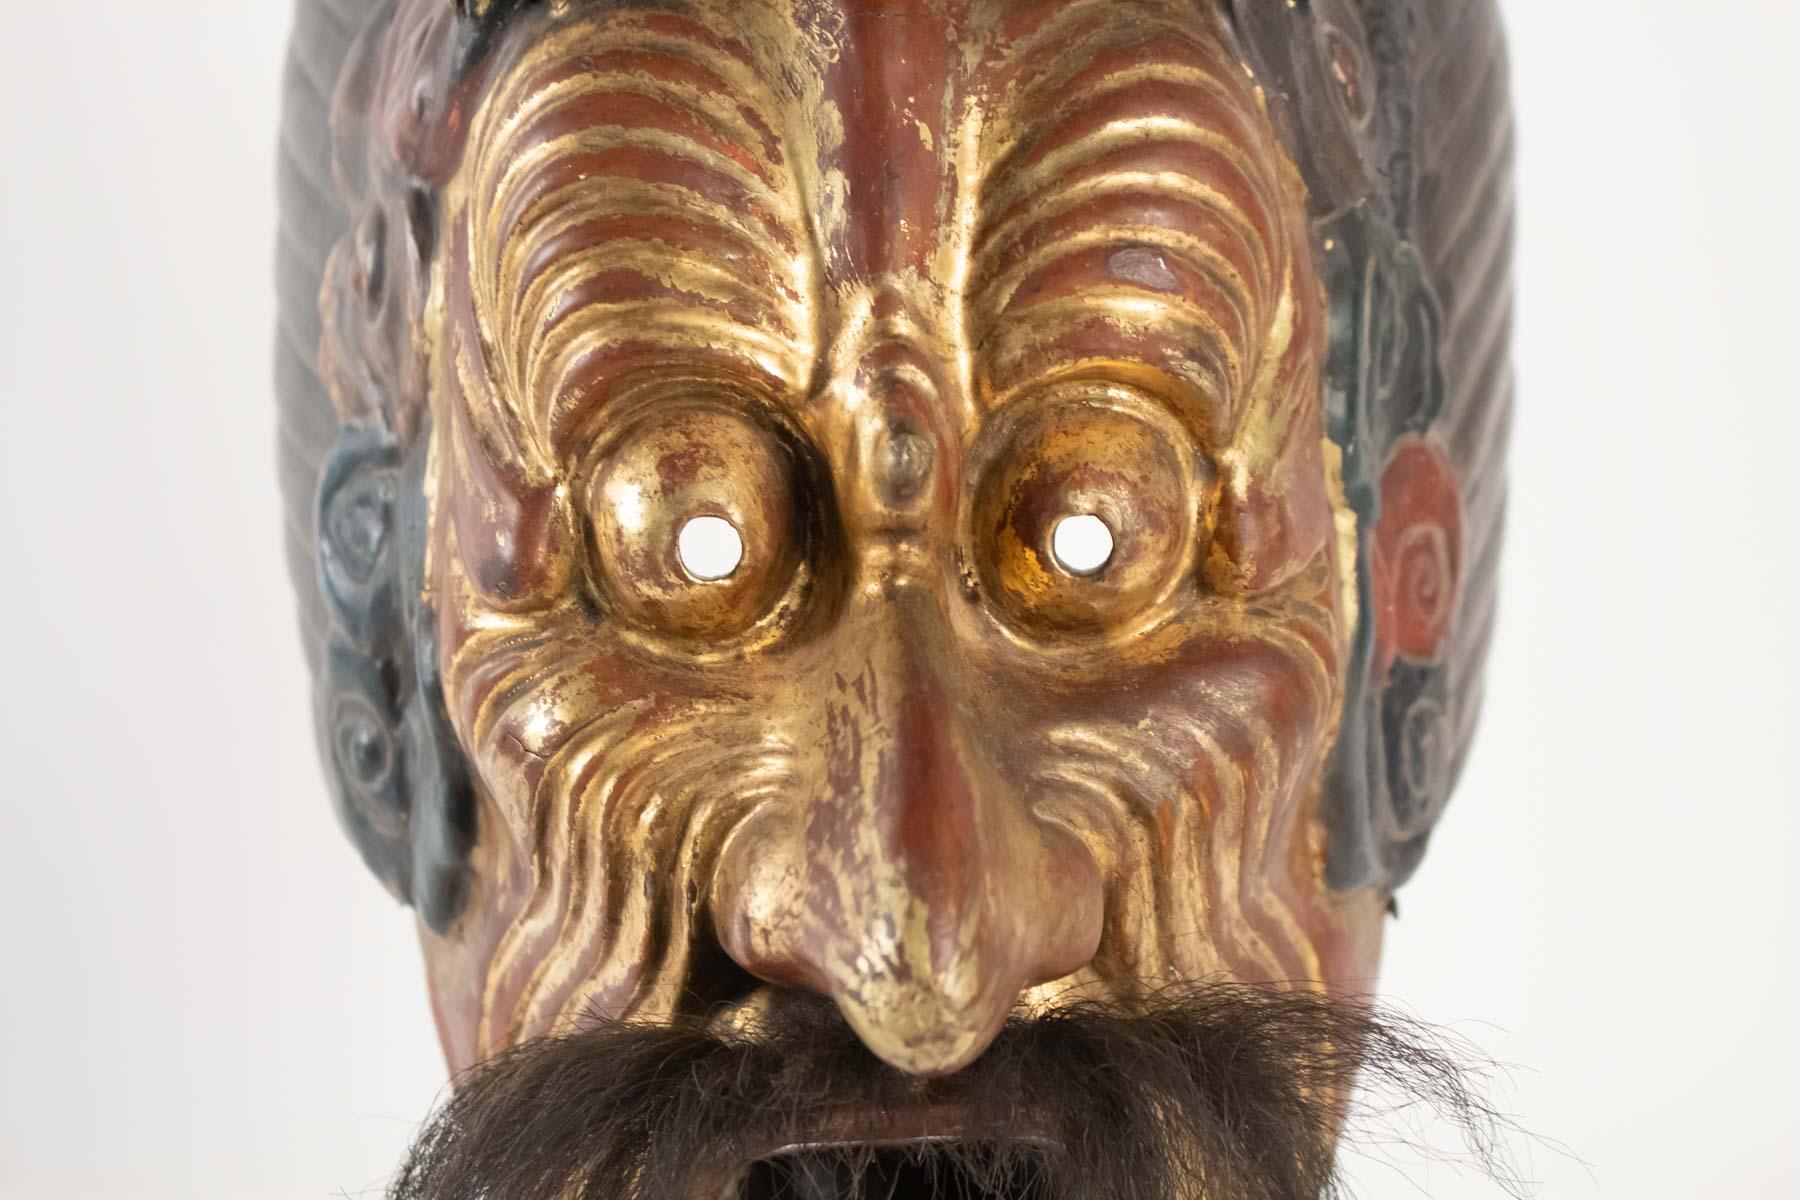 Japonisme Gilded Wood Mask, Polychrome, Japan, Says of the Imperial Dance of Bugaku Dances